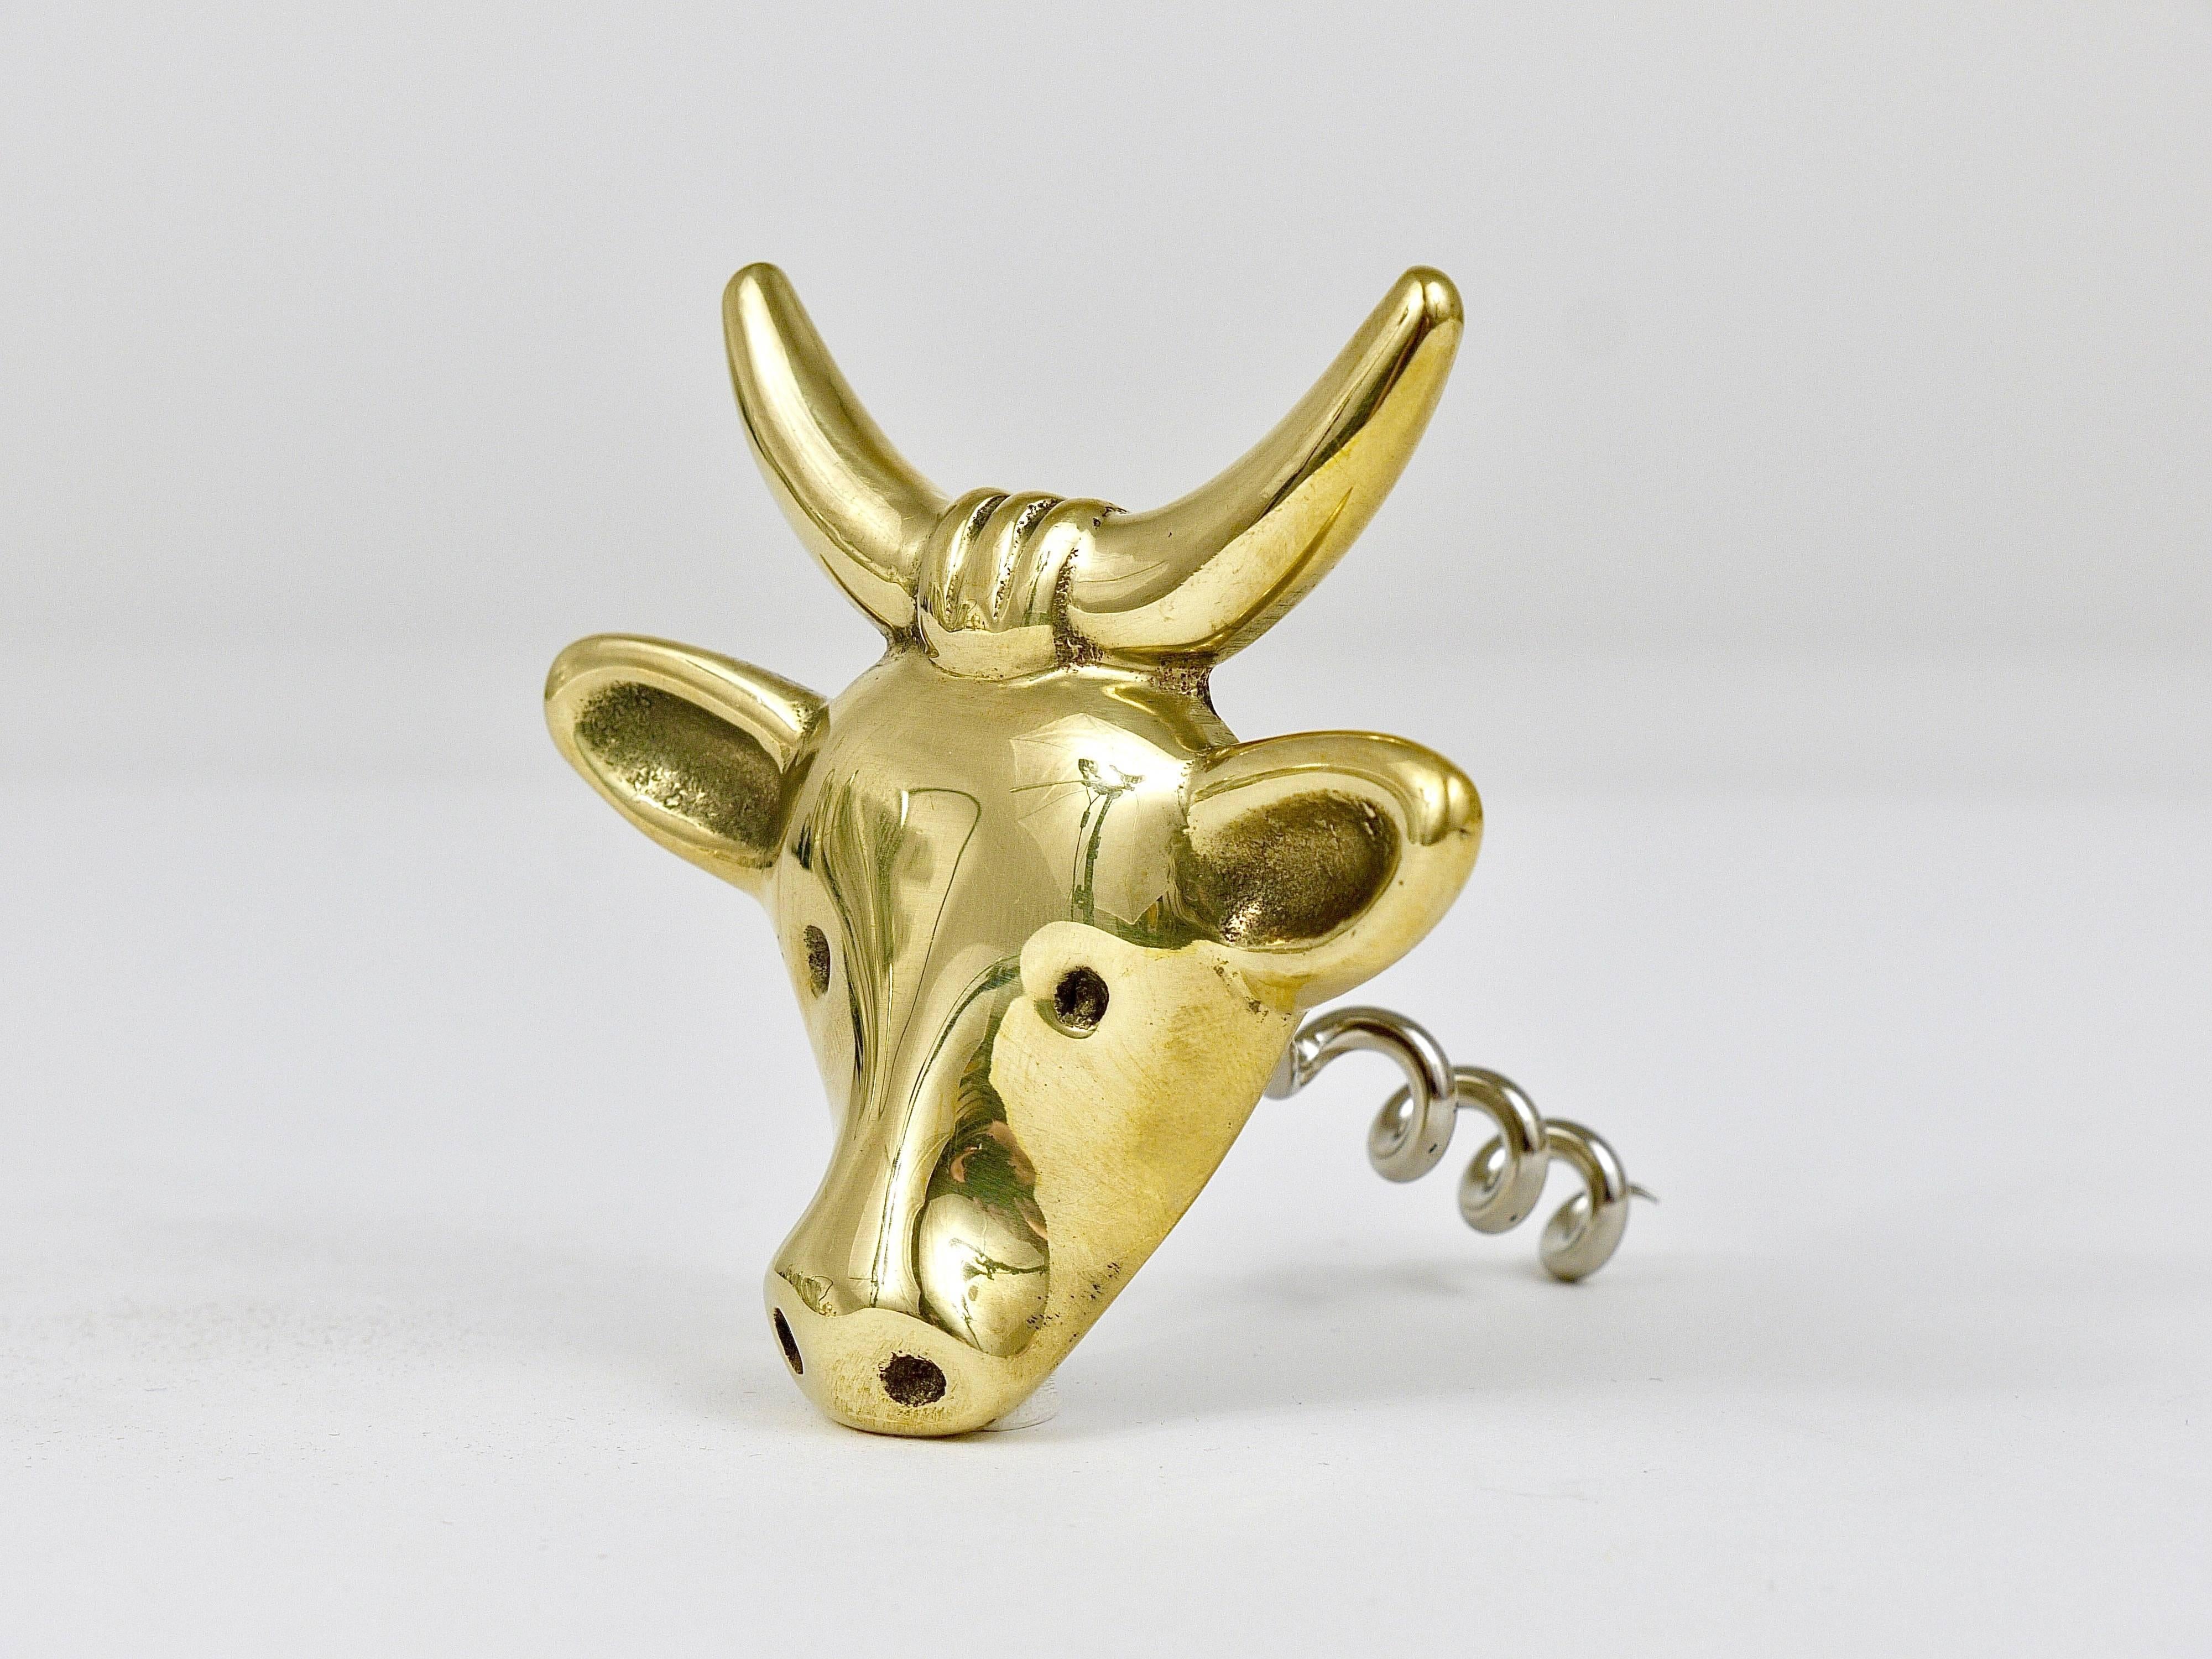 A charming midcentury bottle opener/cork screw, displaying a cow. A very humorous design by Walter Bosse, executed by Herta Baller Austria in the 1950s. Made of polished brass, in very good condition.